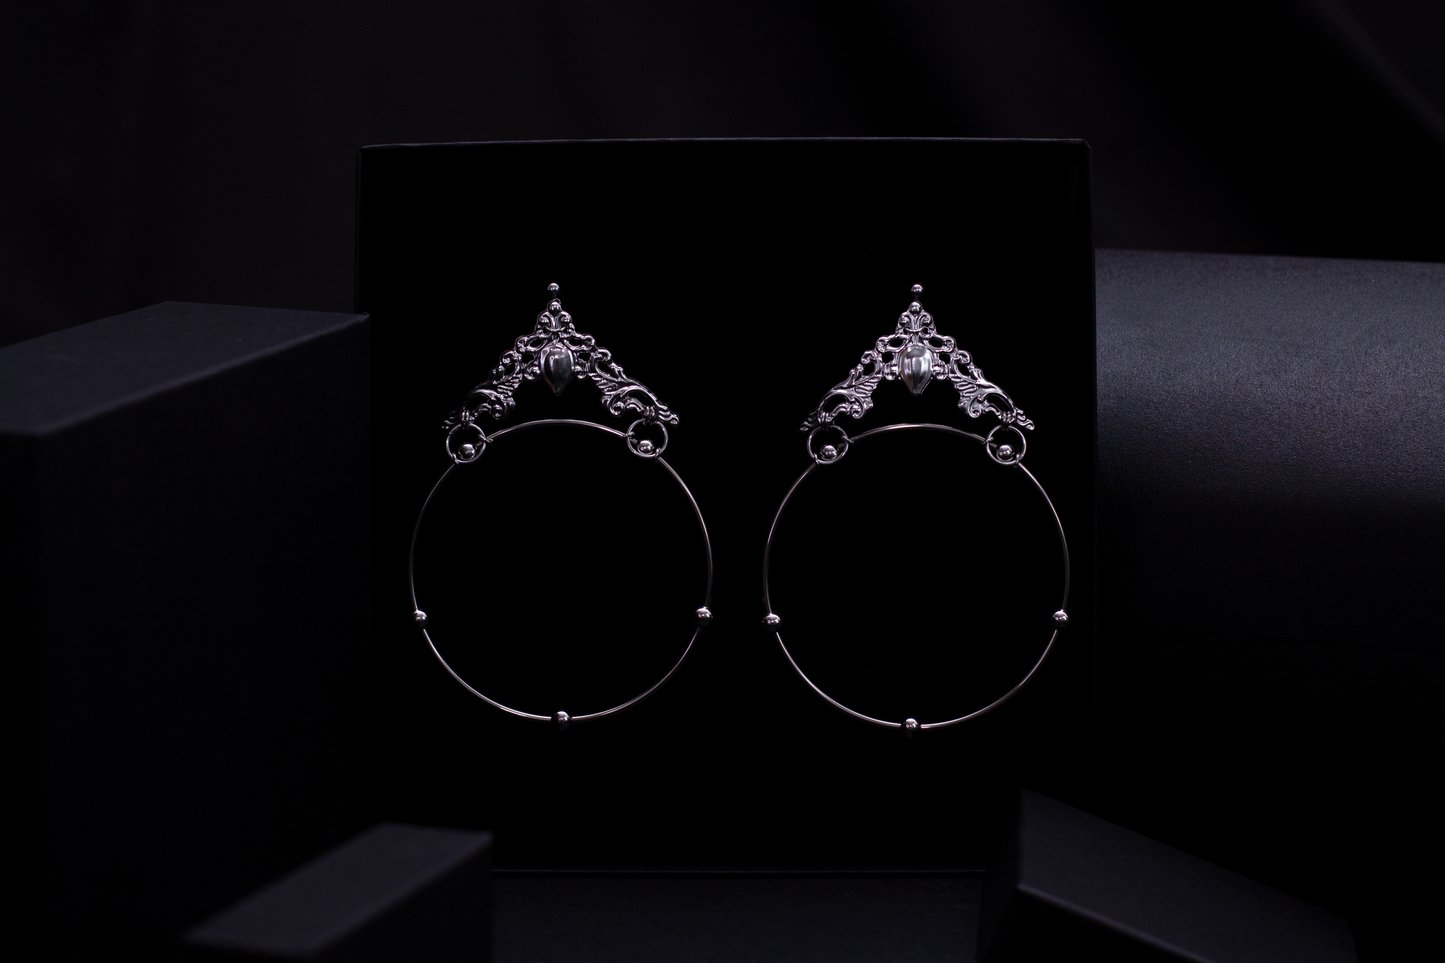 A stunning display of Myril Jewels' craftsmanship, this image showcases bold and wide gothic hoop earrings with ornate detailing. The earrings are set against a dark backdrop, highlighting their intricate design and the shimmering central gemstone. Ideal for those who covet neo-gothic style, these earrings are perfect as a statement piece for Halloween, goth girlfriend gifts, or as a distinctive accessory for any alternative wardrobe.